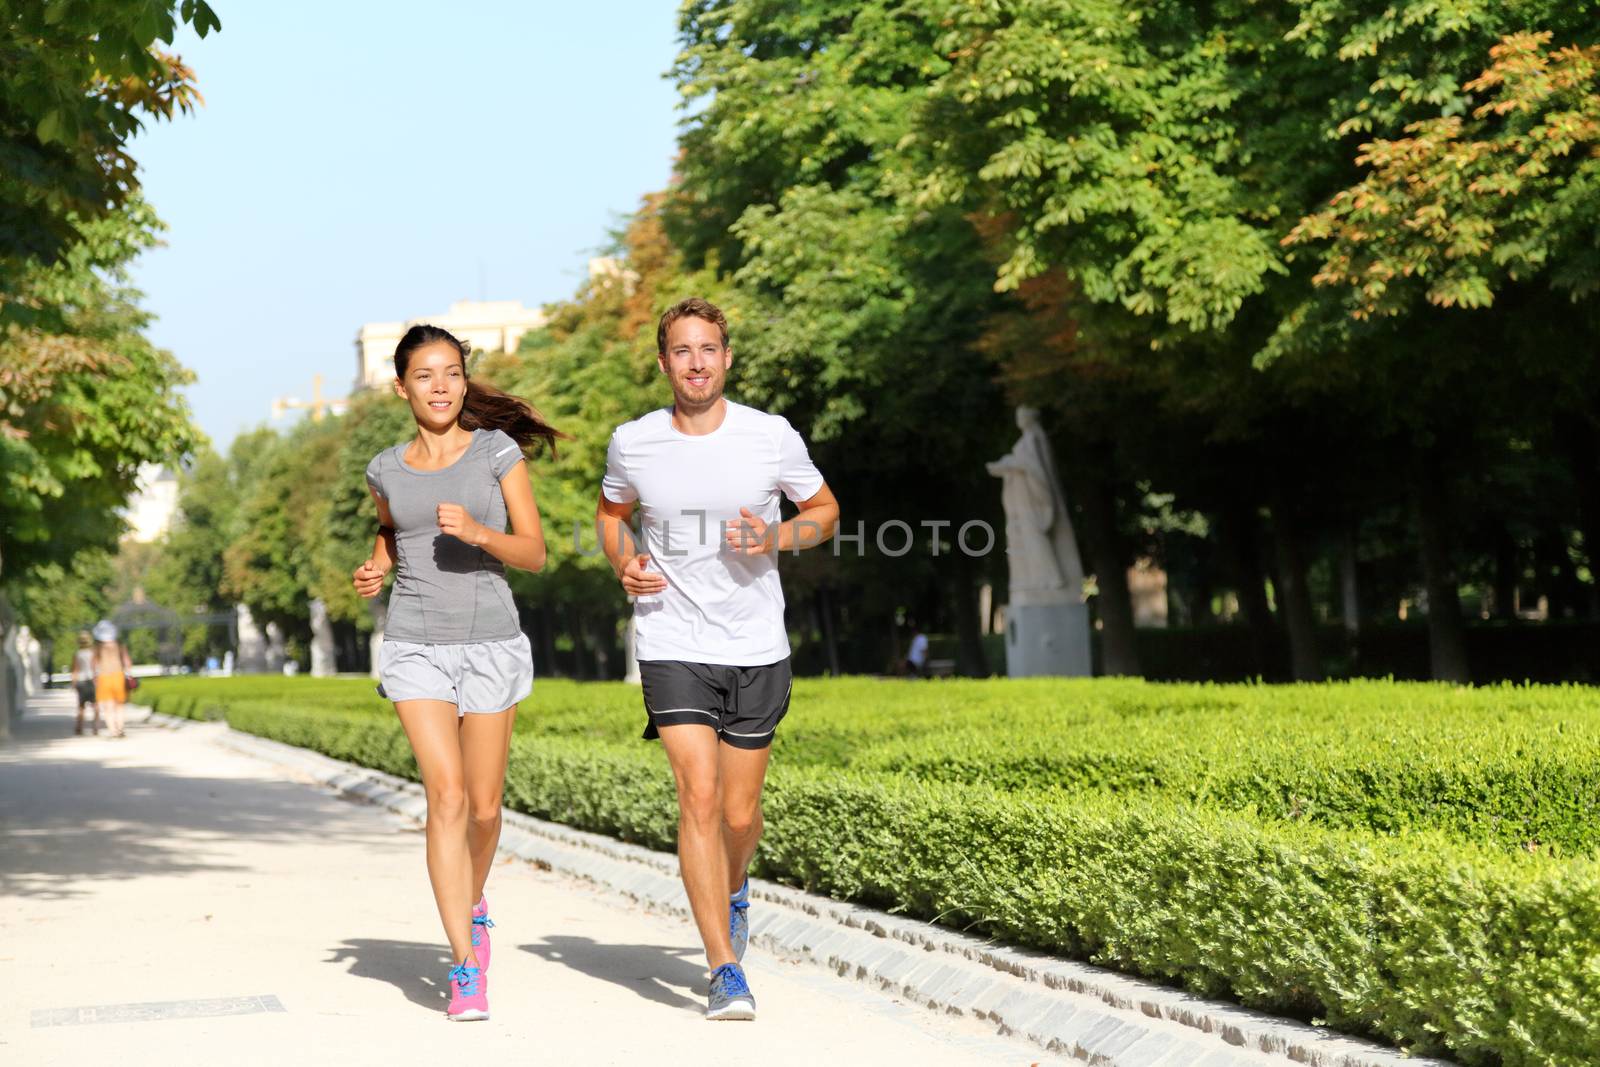 Running couple runners jogging in city park. Exercising woman and man runner training together on run living healthy active lifestyle in Buen Retiro Park, Parque el Retiro in Madrid, Spain, Europe.